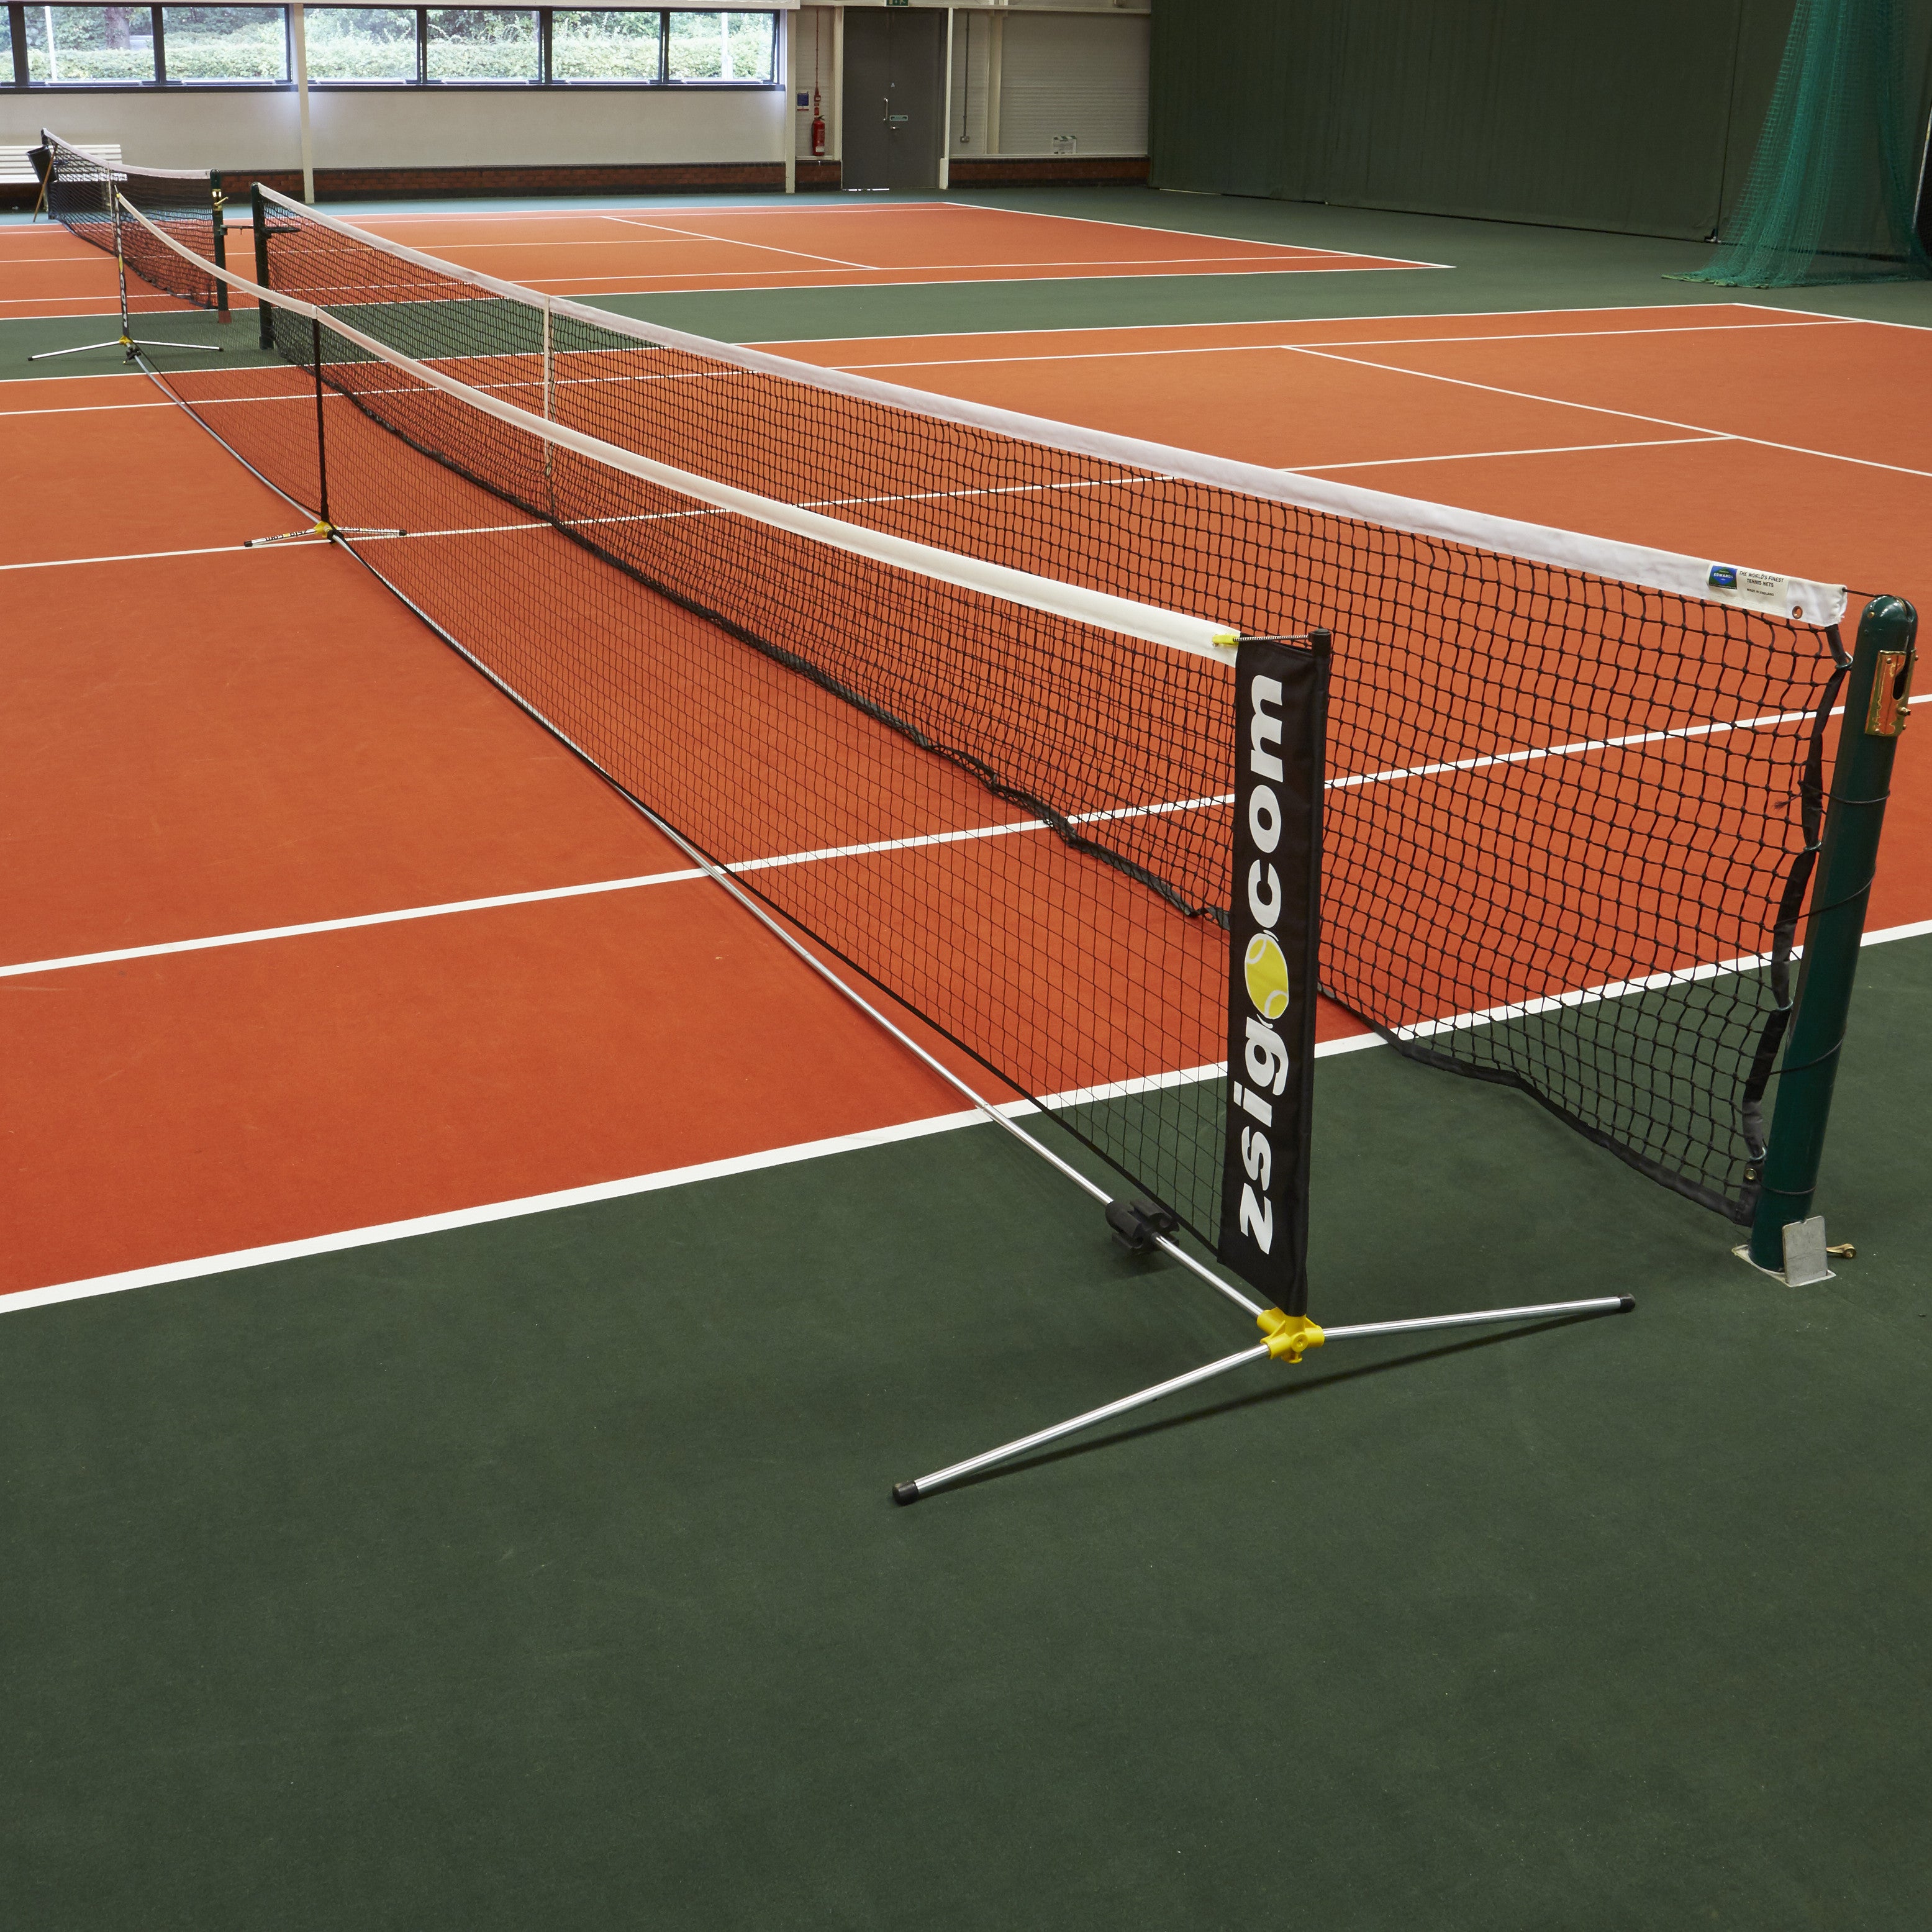 New portable Tennis Net: full-size, full-height net system from Zsig.